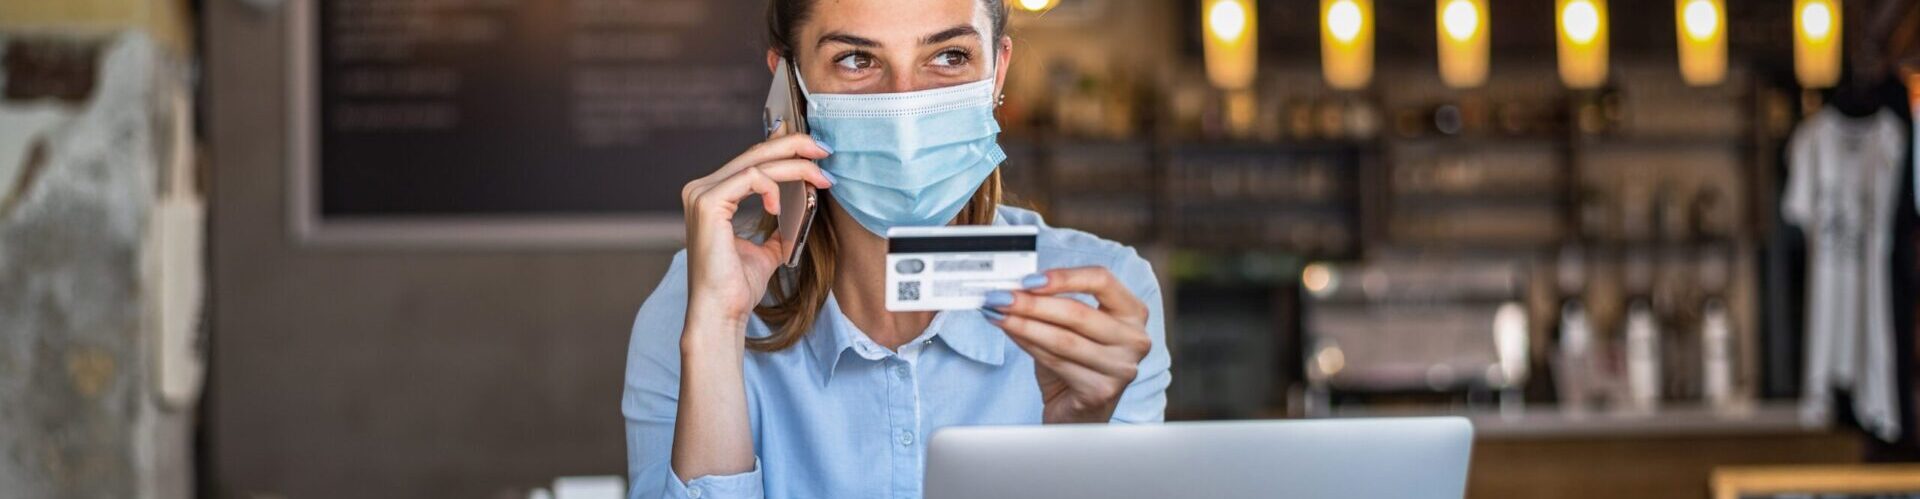 Portrait of young business woman wearing mask while doing shopping online and payment by credit cards. Conceptual of new normal lifestyle during covid-19 pandemic.